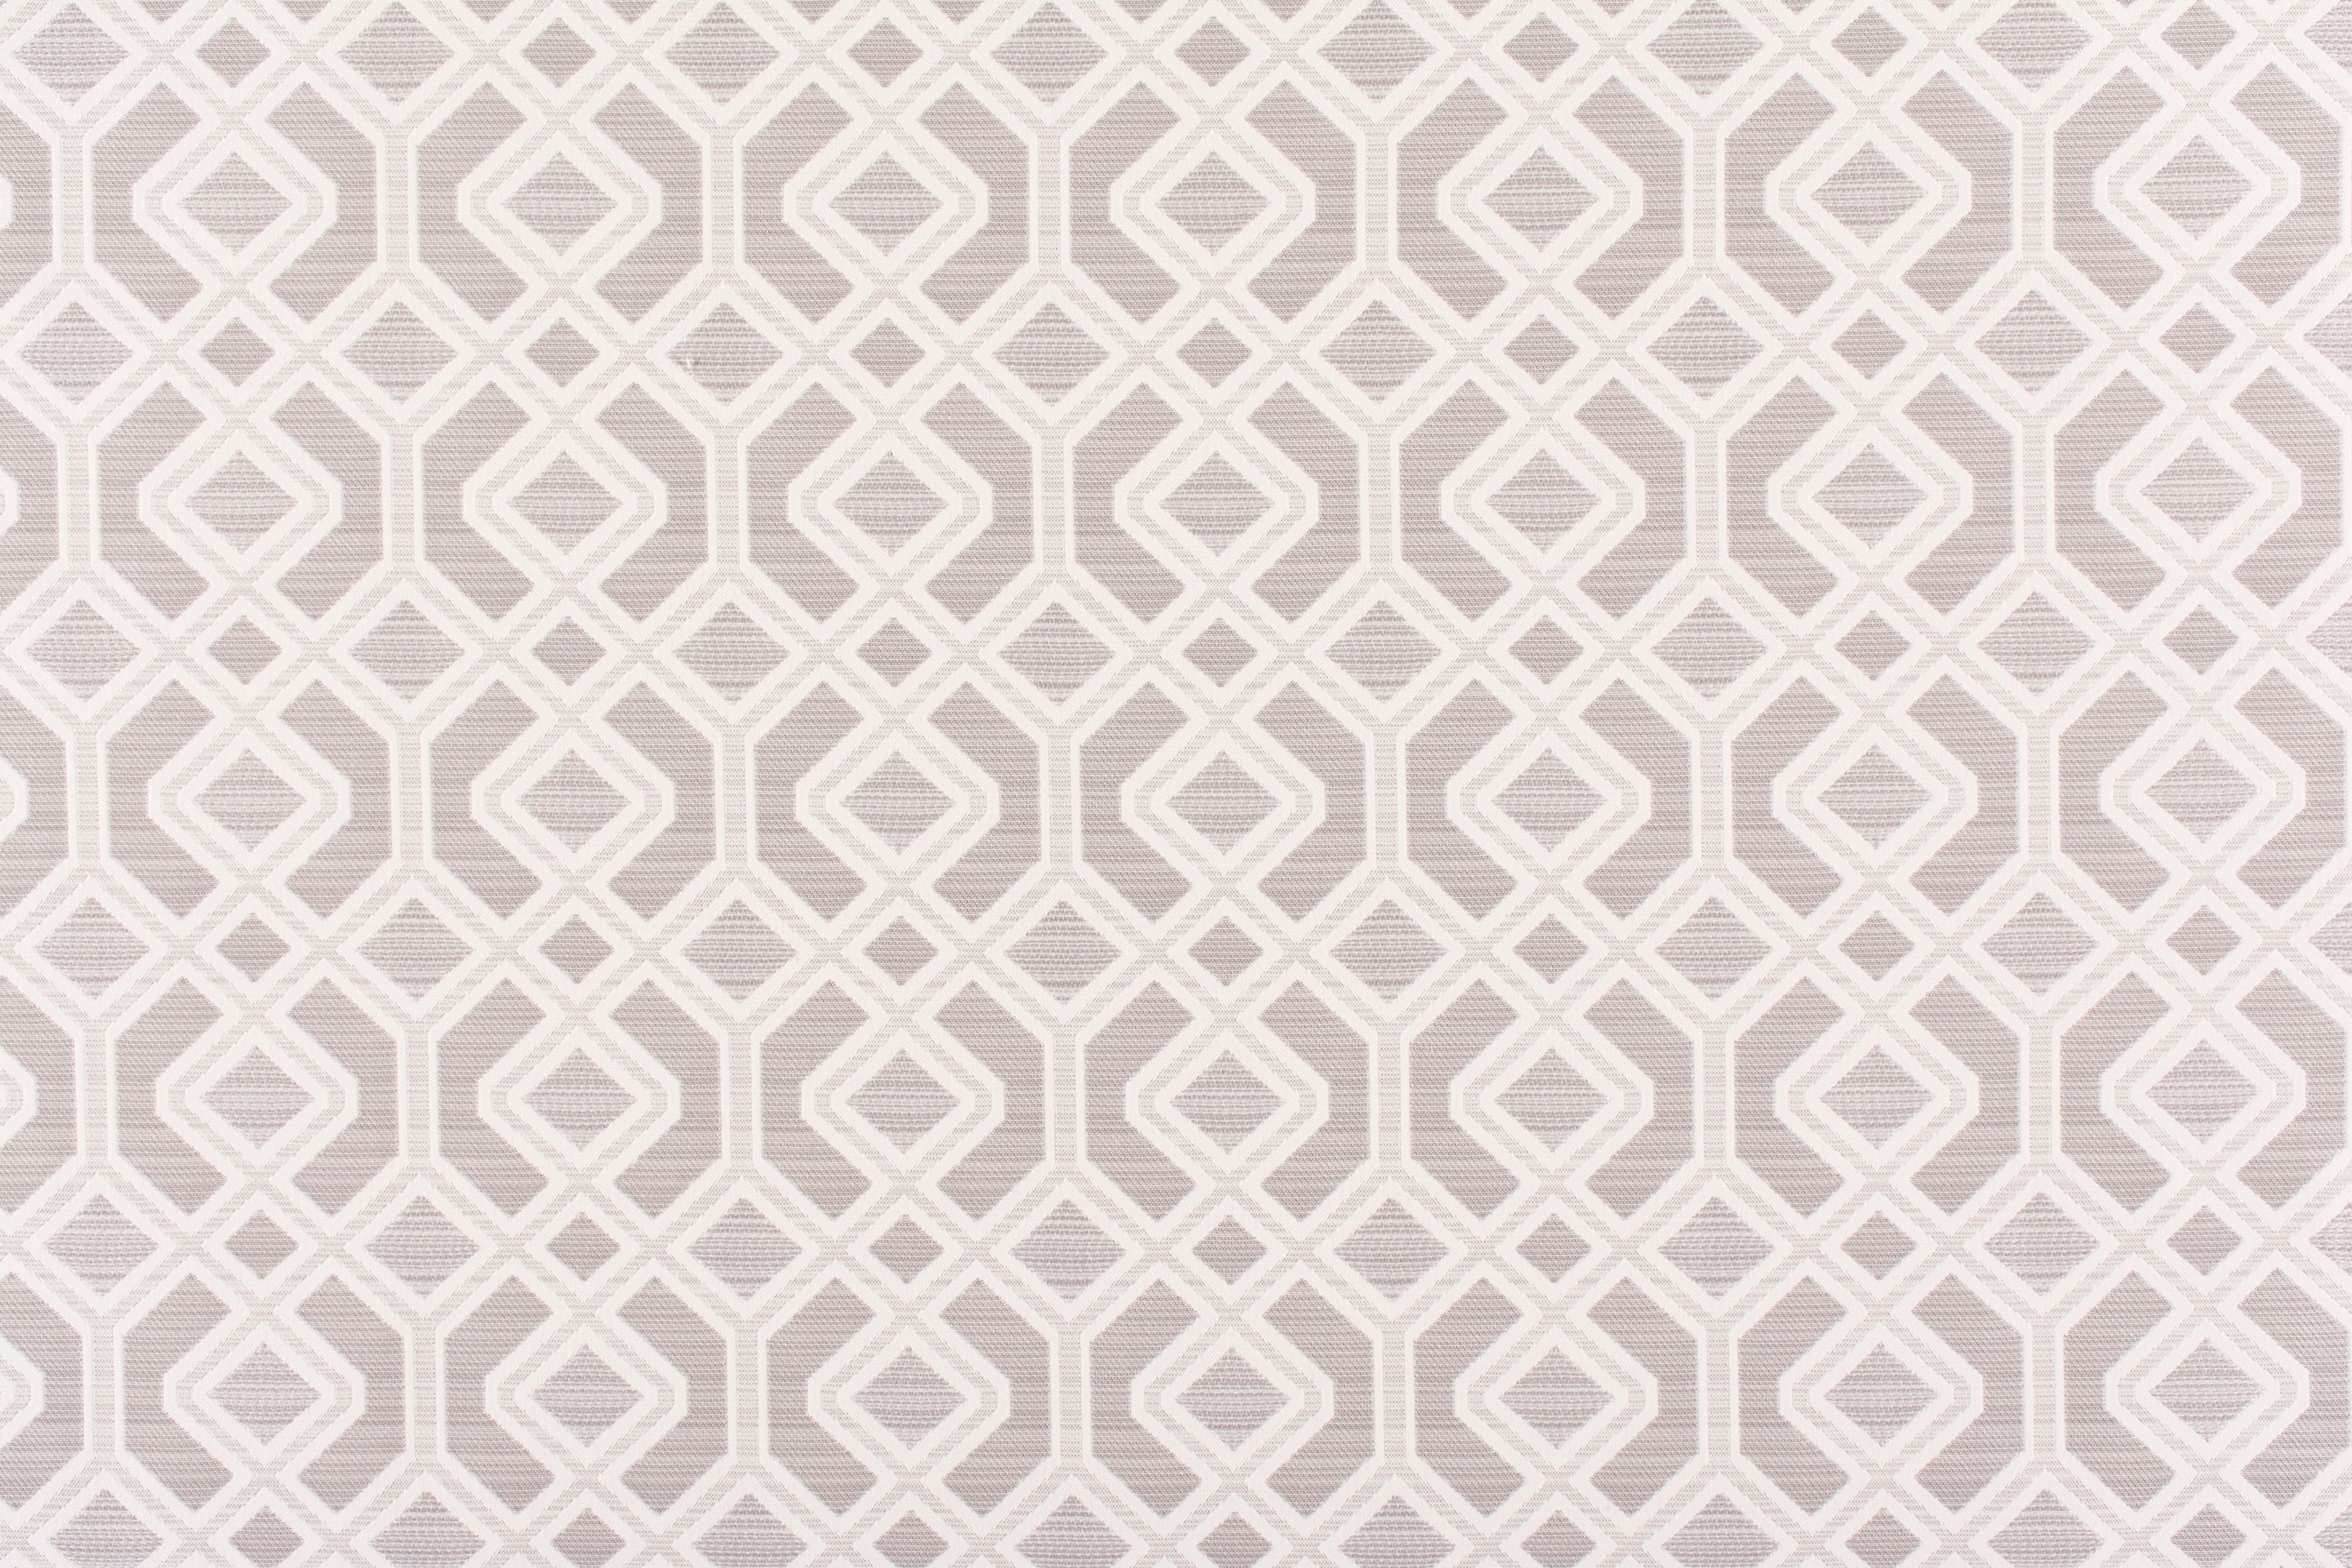 Oak Bluff fabric in stone color - pattern number WR 00062995 - by Scalamandre in the Old World Weavers collection